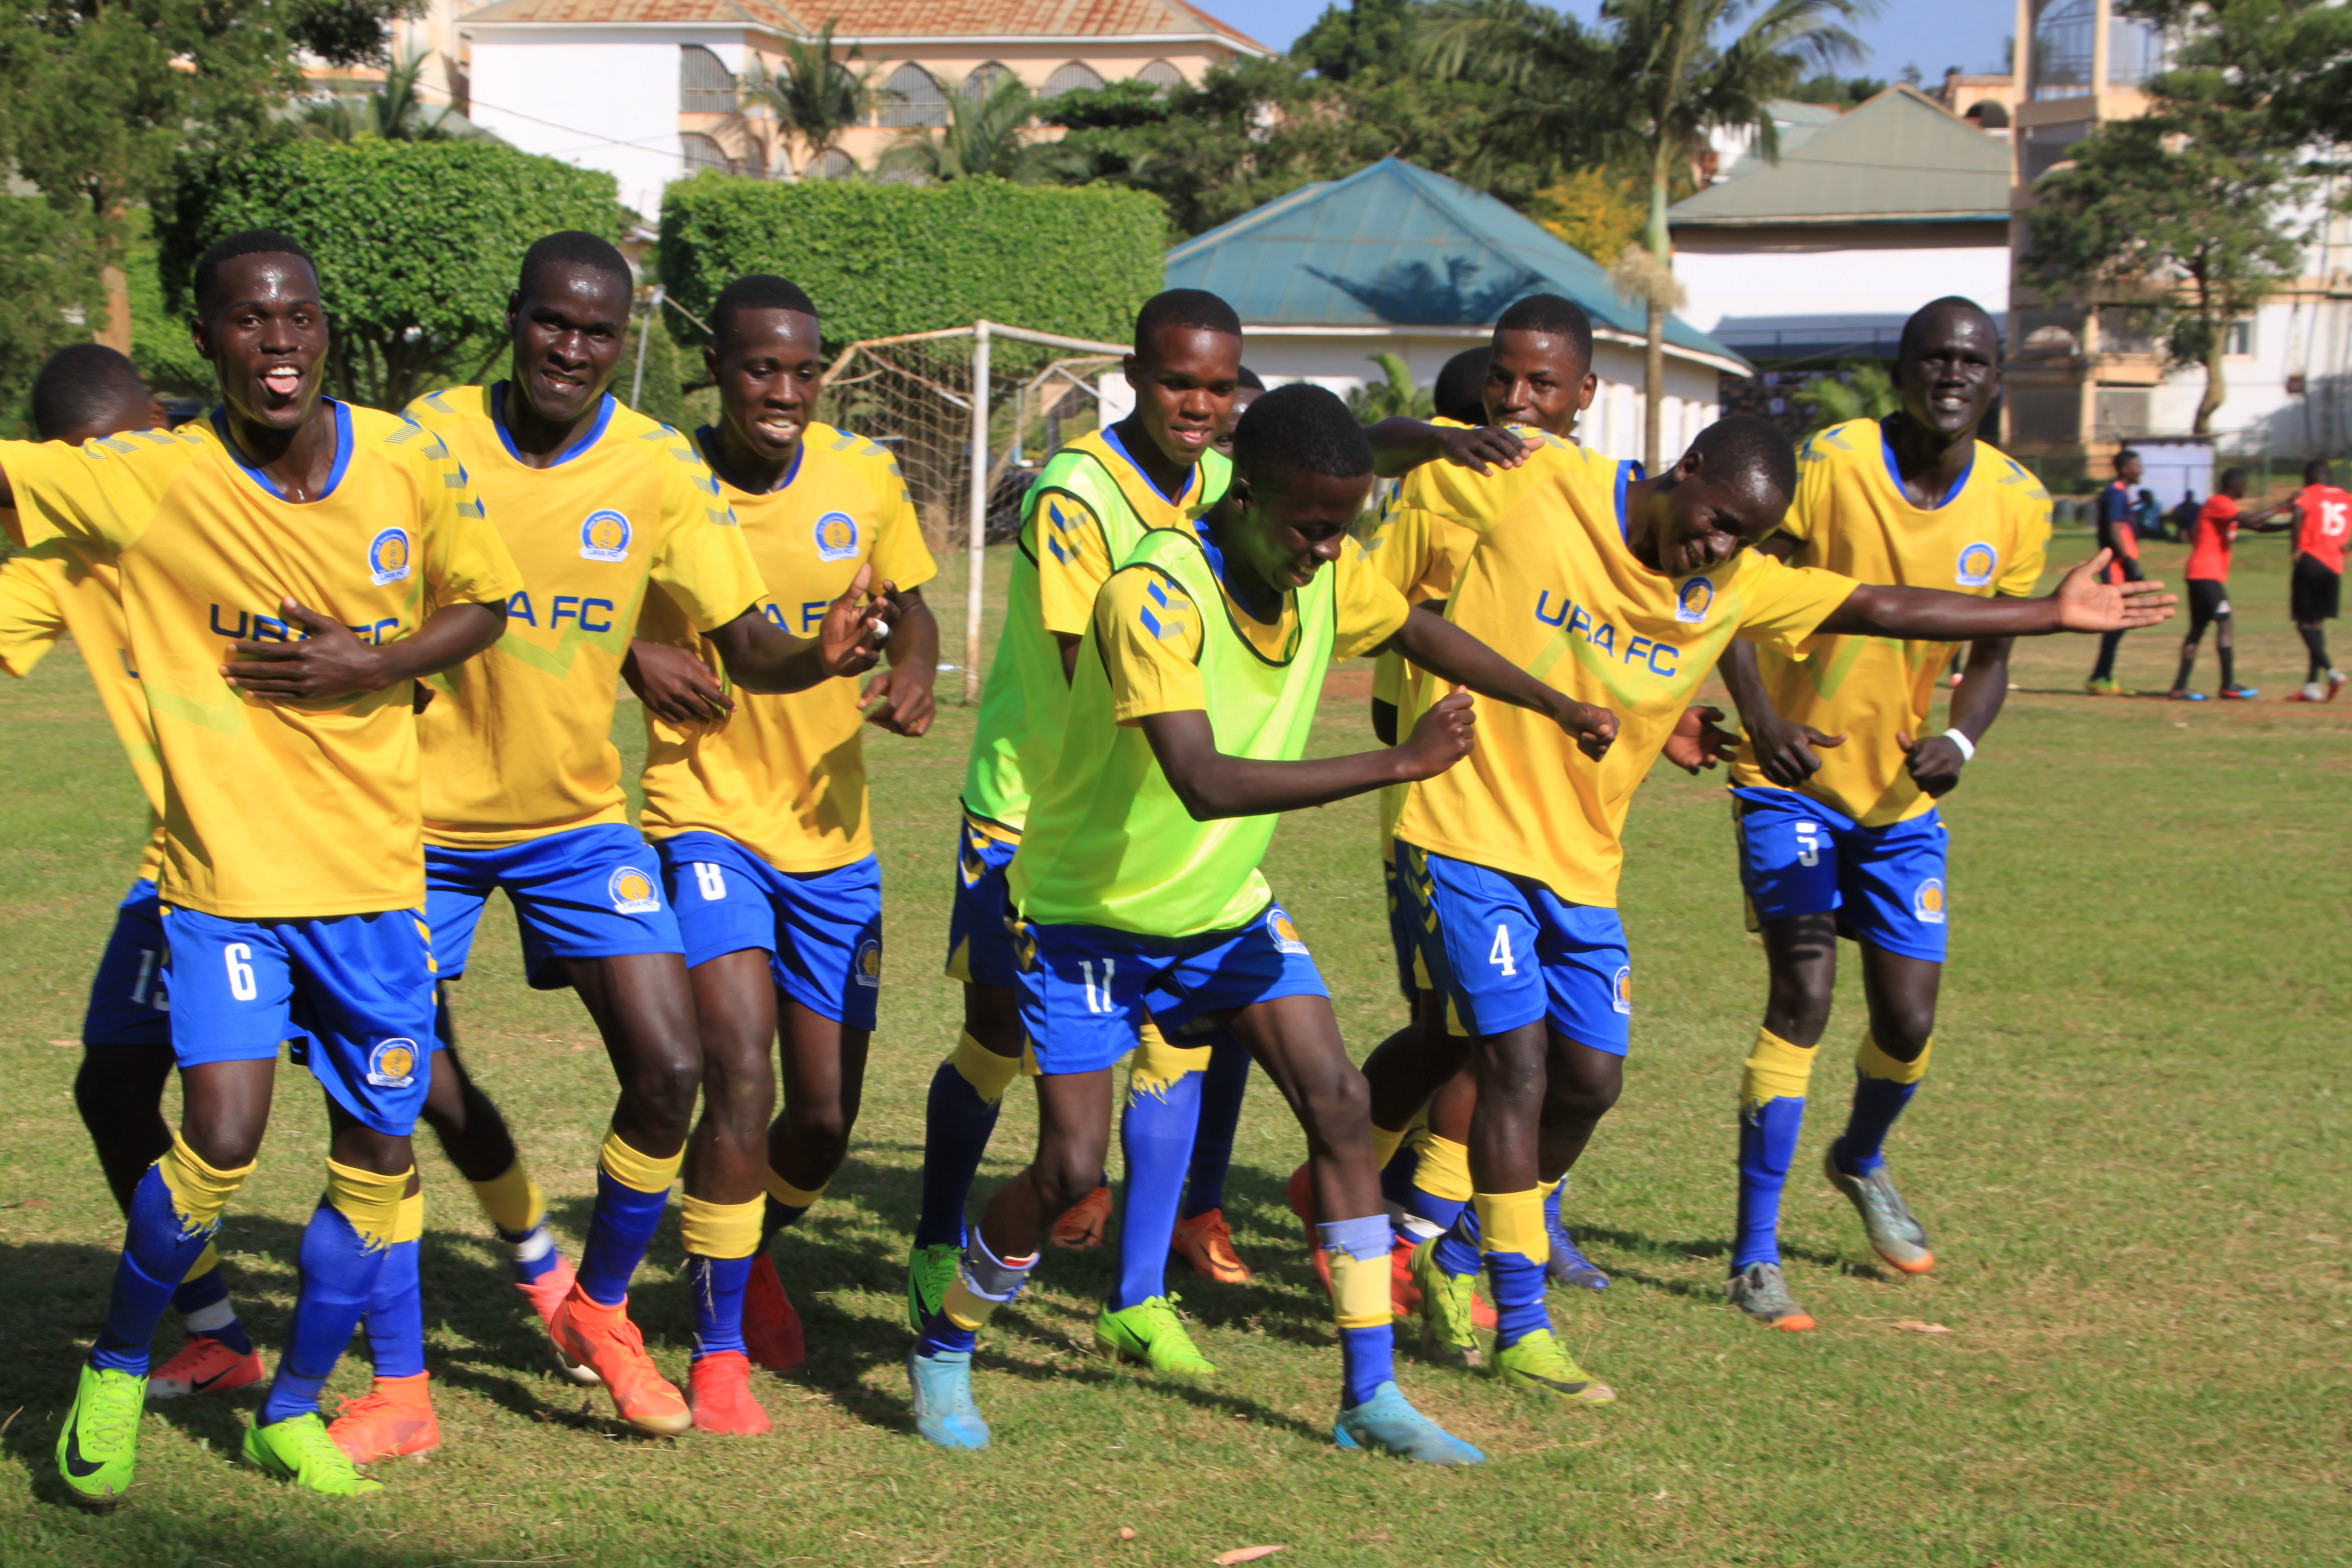 FJL Match Report: URA FC JT condemn Vipers SC JT to first loss